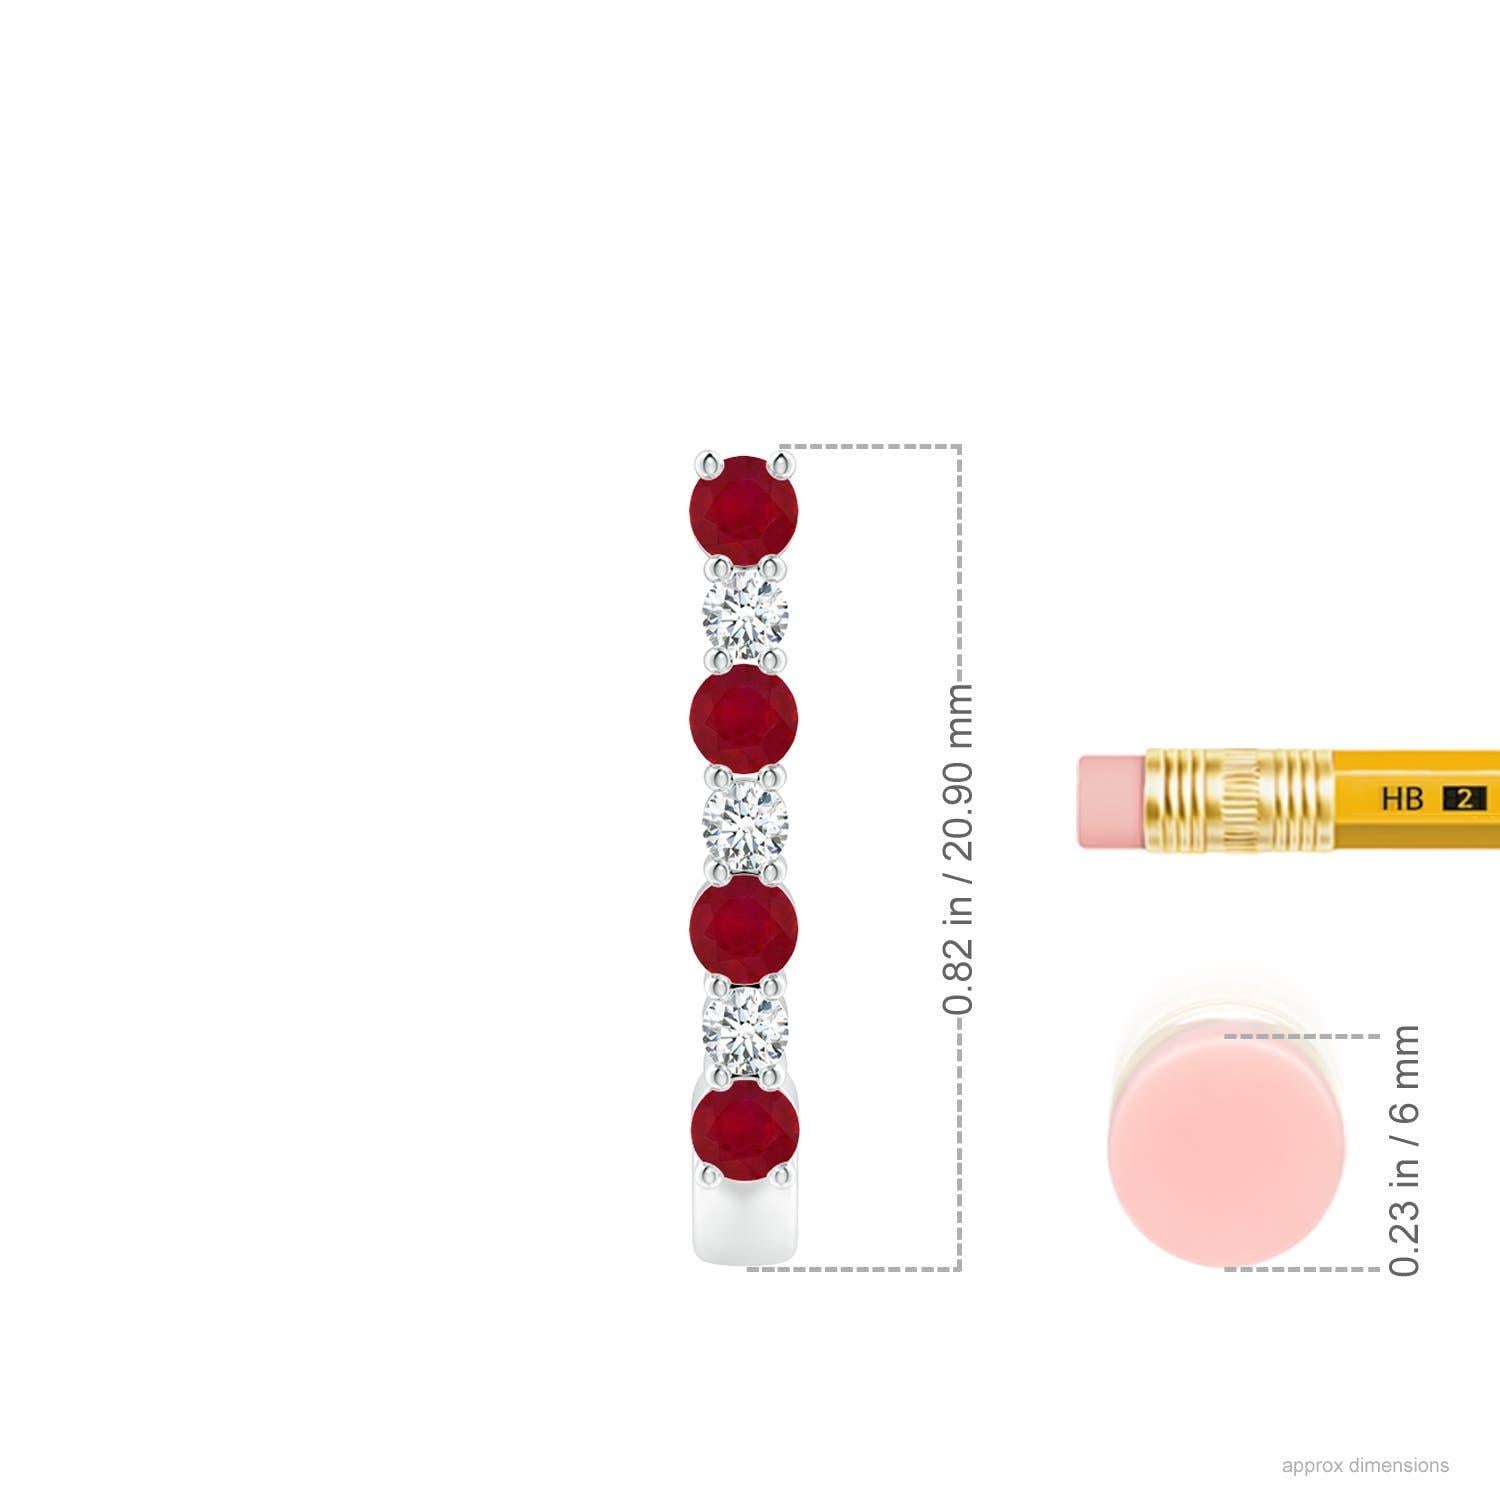 These stunning ruby and diamond hoop earrings are exquisitely crafted in platinum. The J hoops are alternately studded with bright red rubies and sparkling diamonds for a captivating effect.
Ruby is the Birthstone for July and traditional gift for